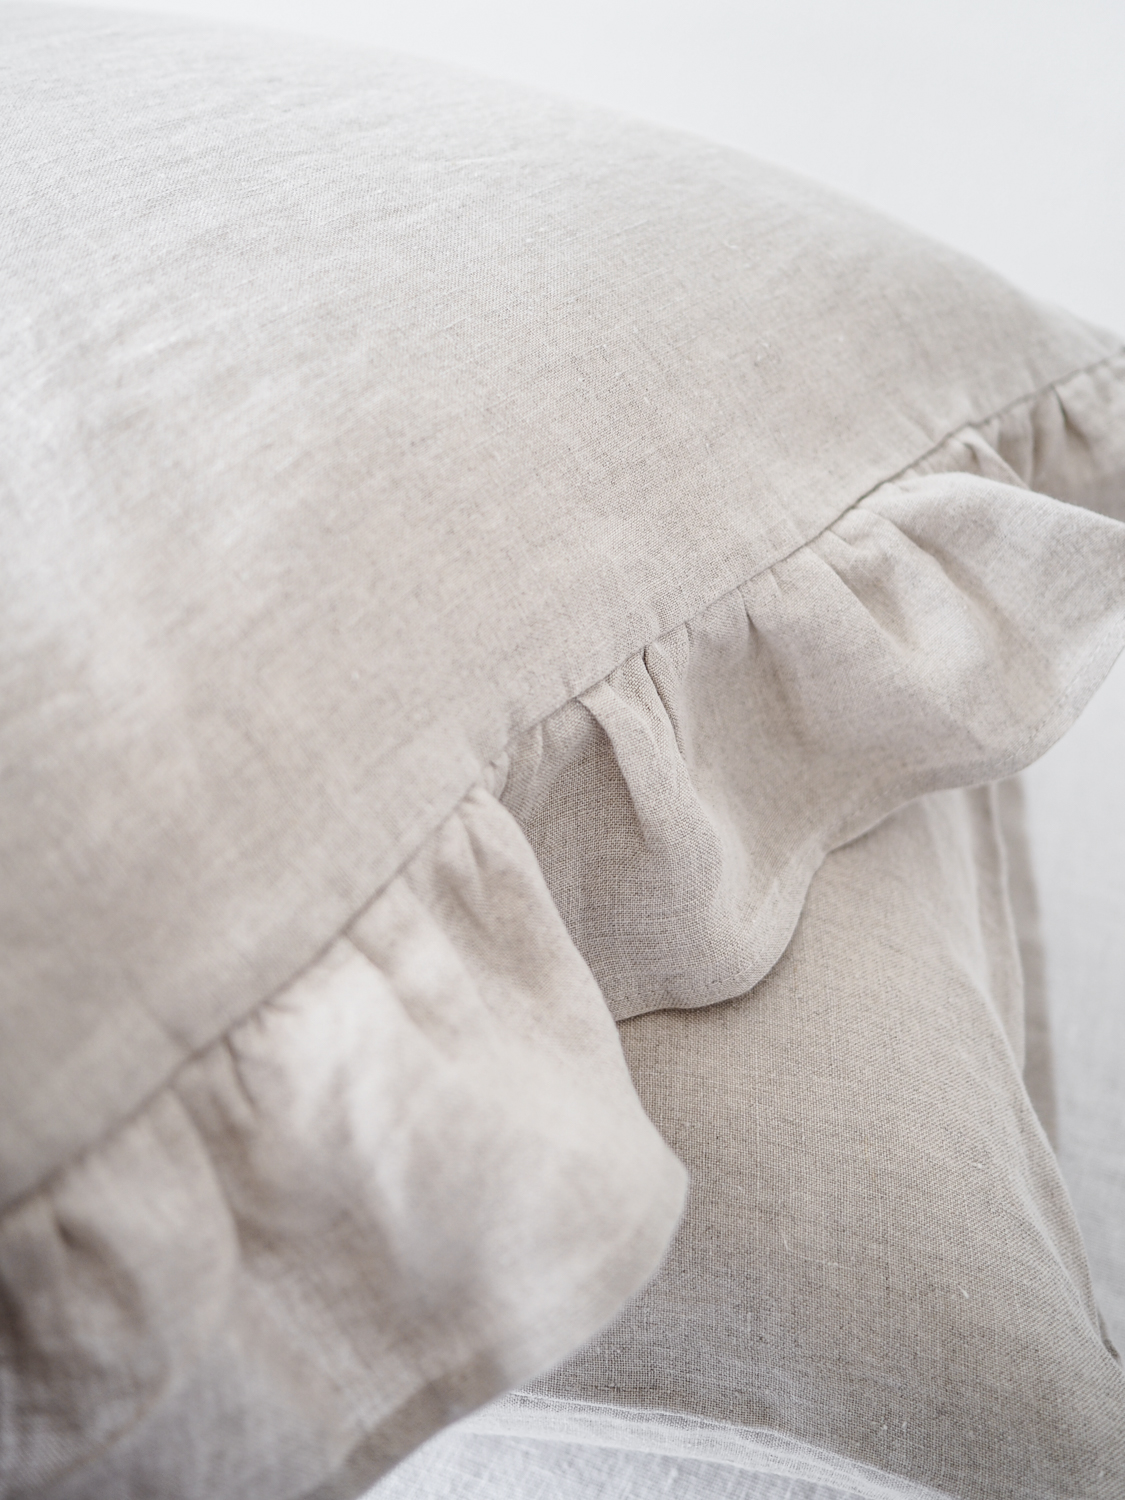 Non-Allergic Soft Cushion Cover 100% Linen Pillow Sham with Ruffles Different Sizes and Colors Shabby Chic Pillowcase 